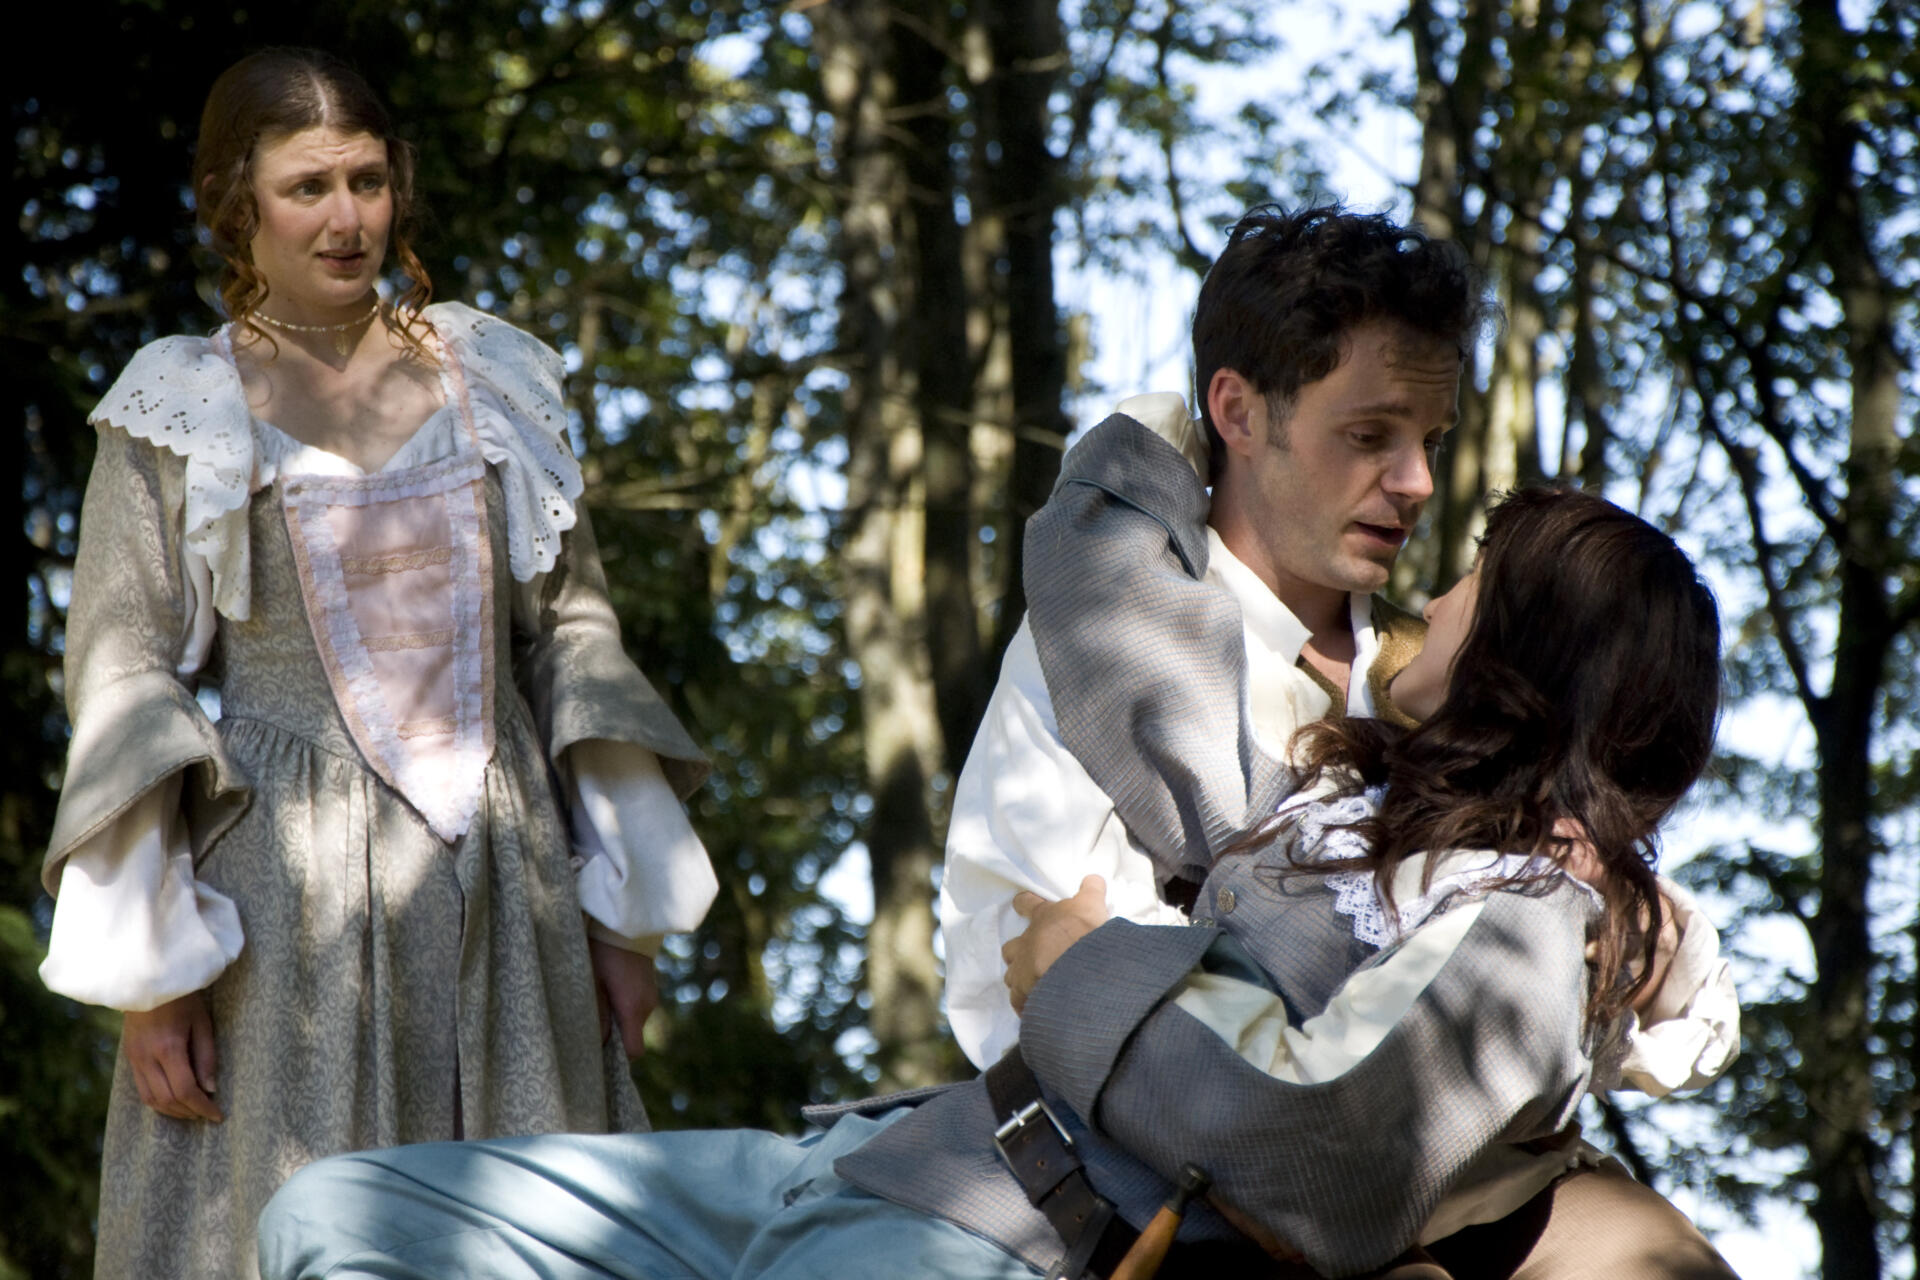 Nicole Vernon, Alex Garnett, and Kate Kraay in As You Like It - 2010